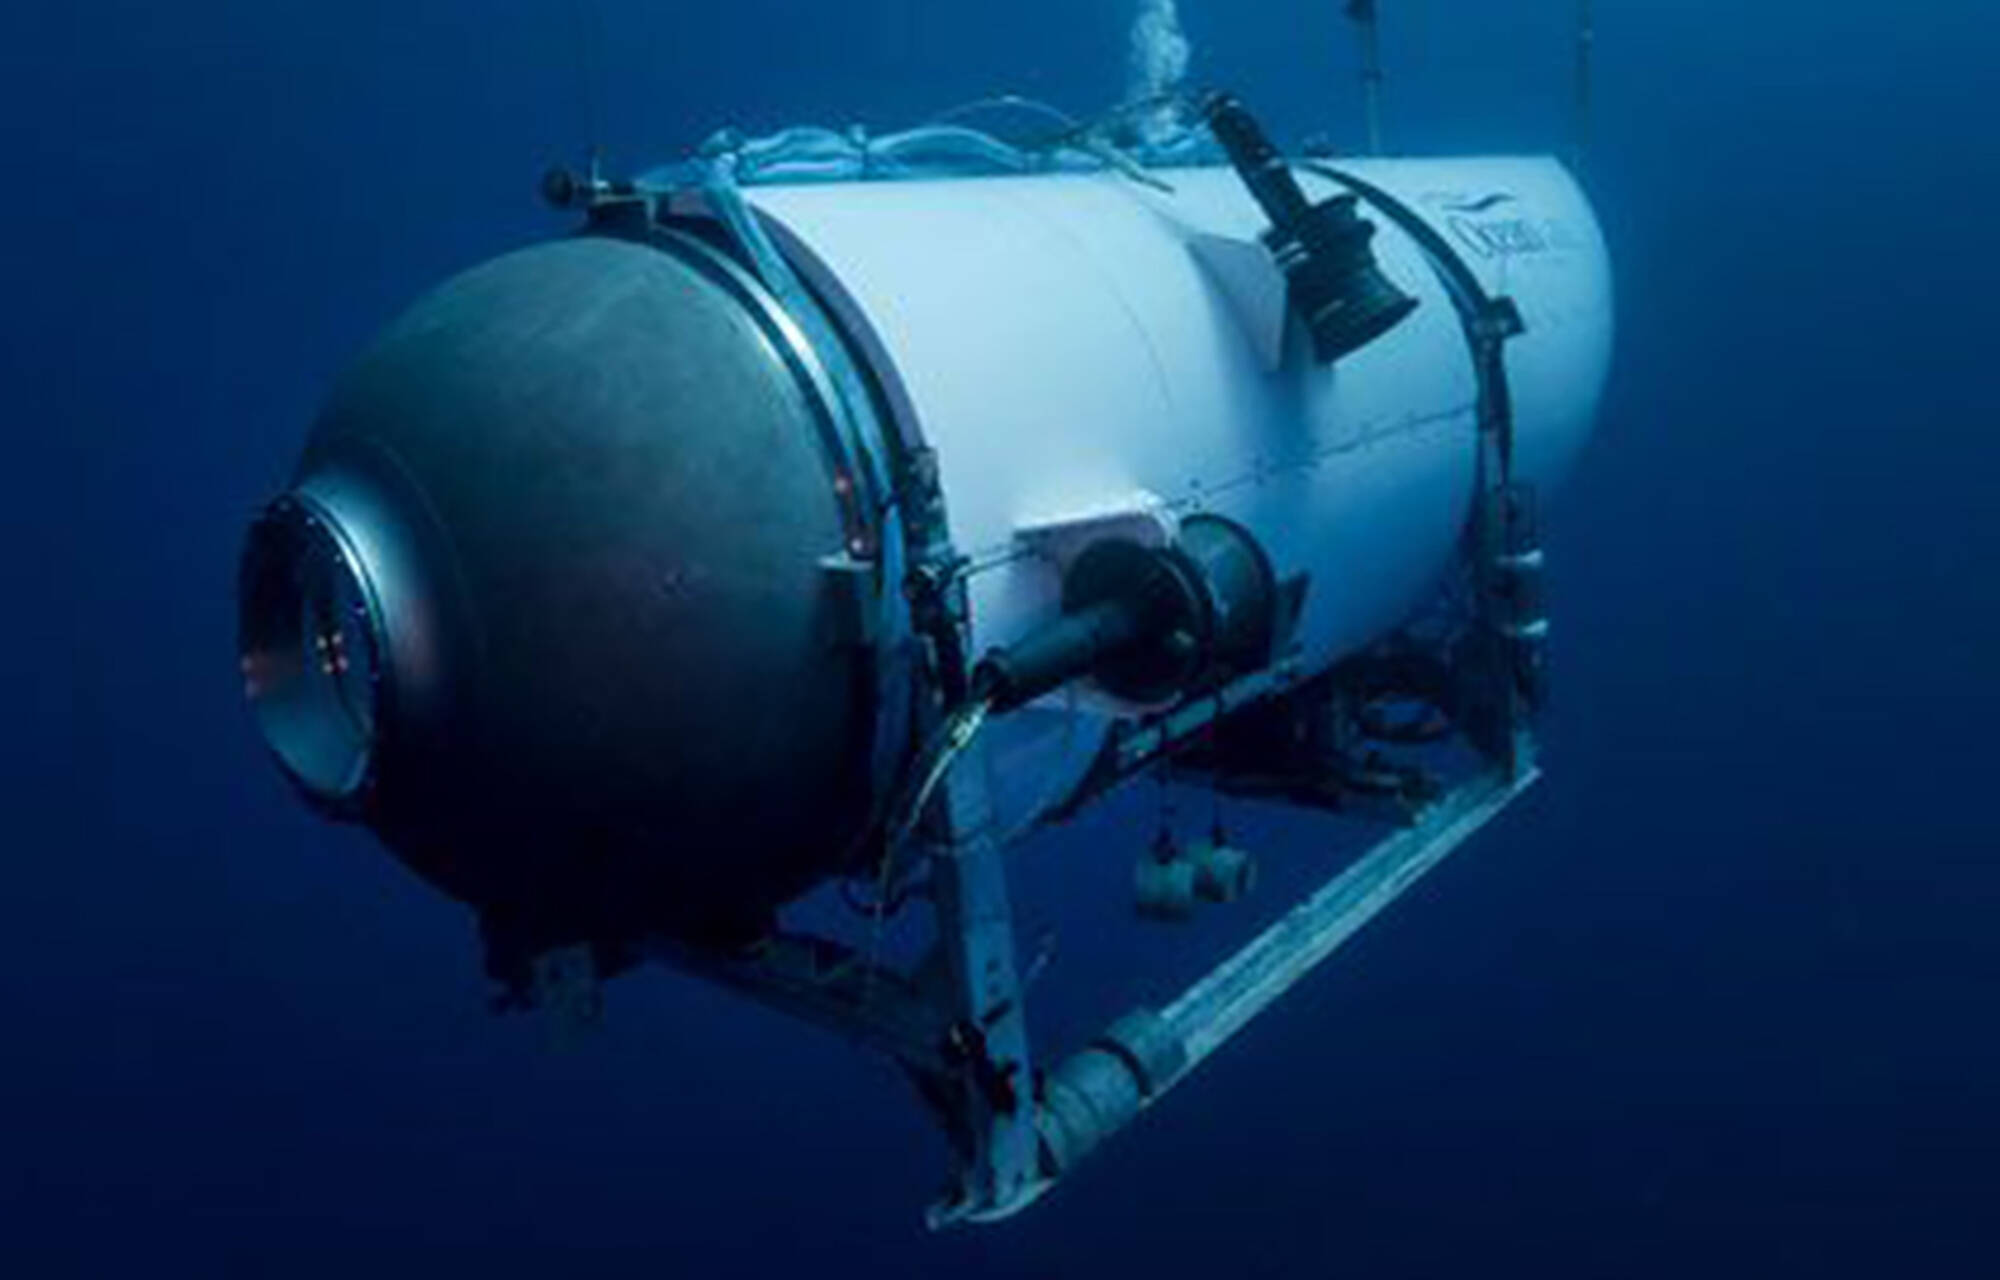 This undated image provided by OceanGate Expeditions in June 2021 shows the company’s Titan submersible. (OceanGate Expeditions via AP, File)